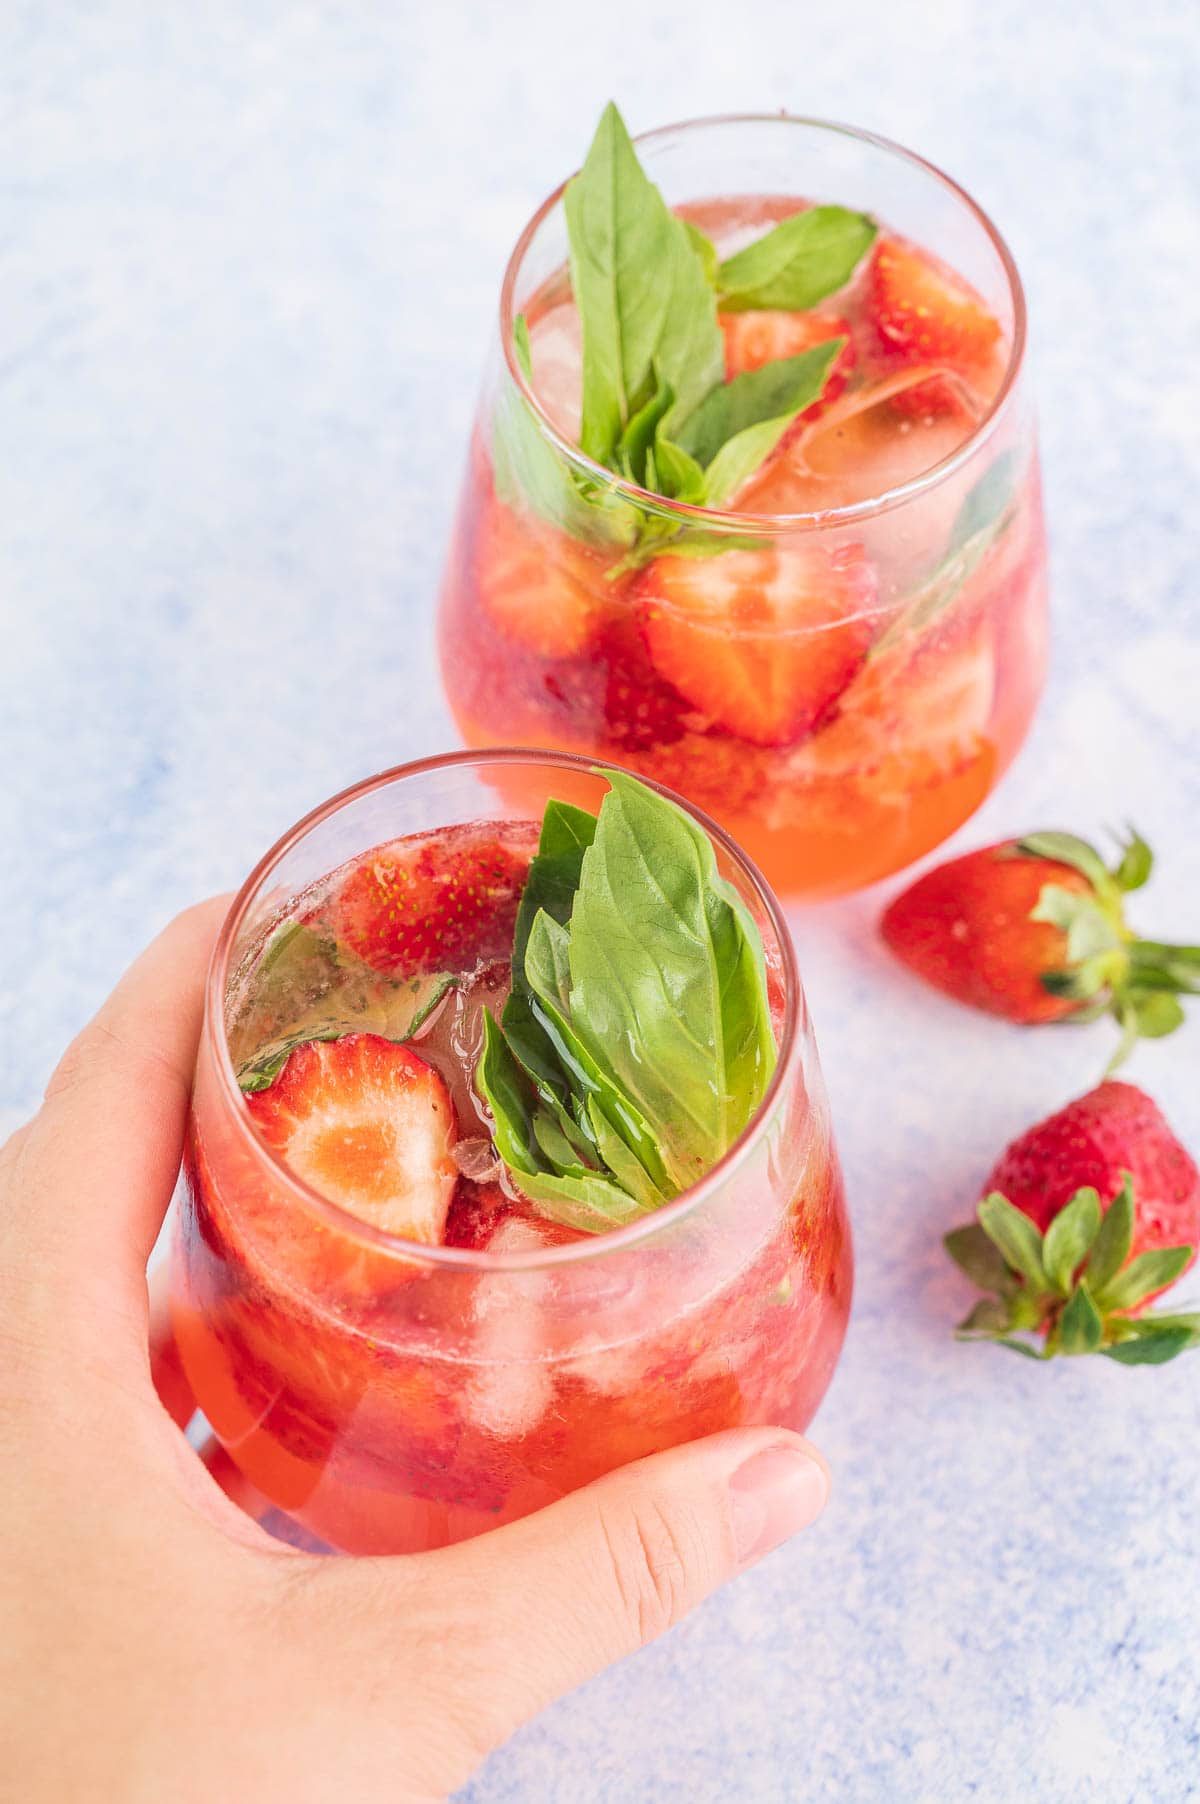 Strawberry basil cocktail in a glass held in a hand.